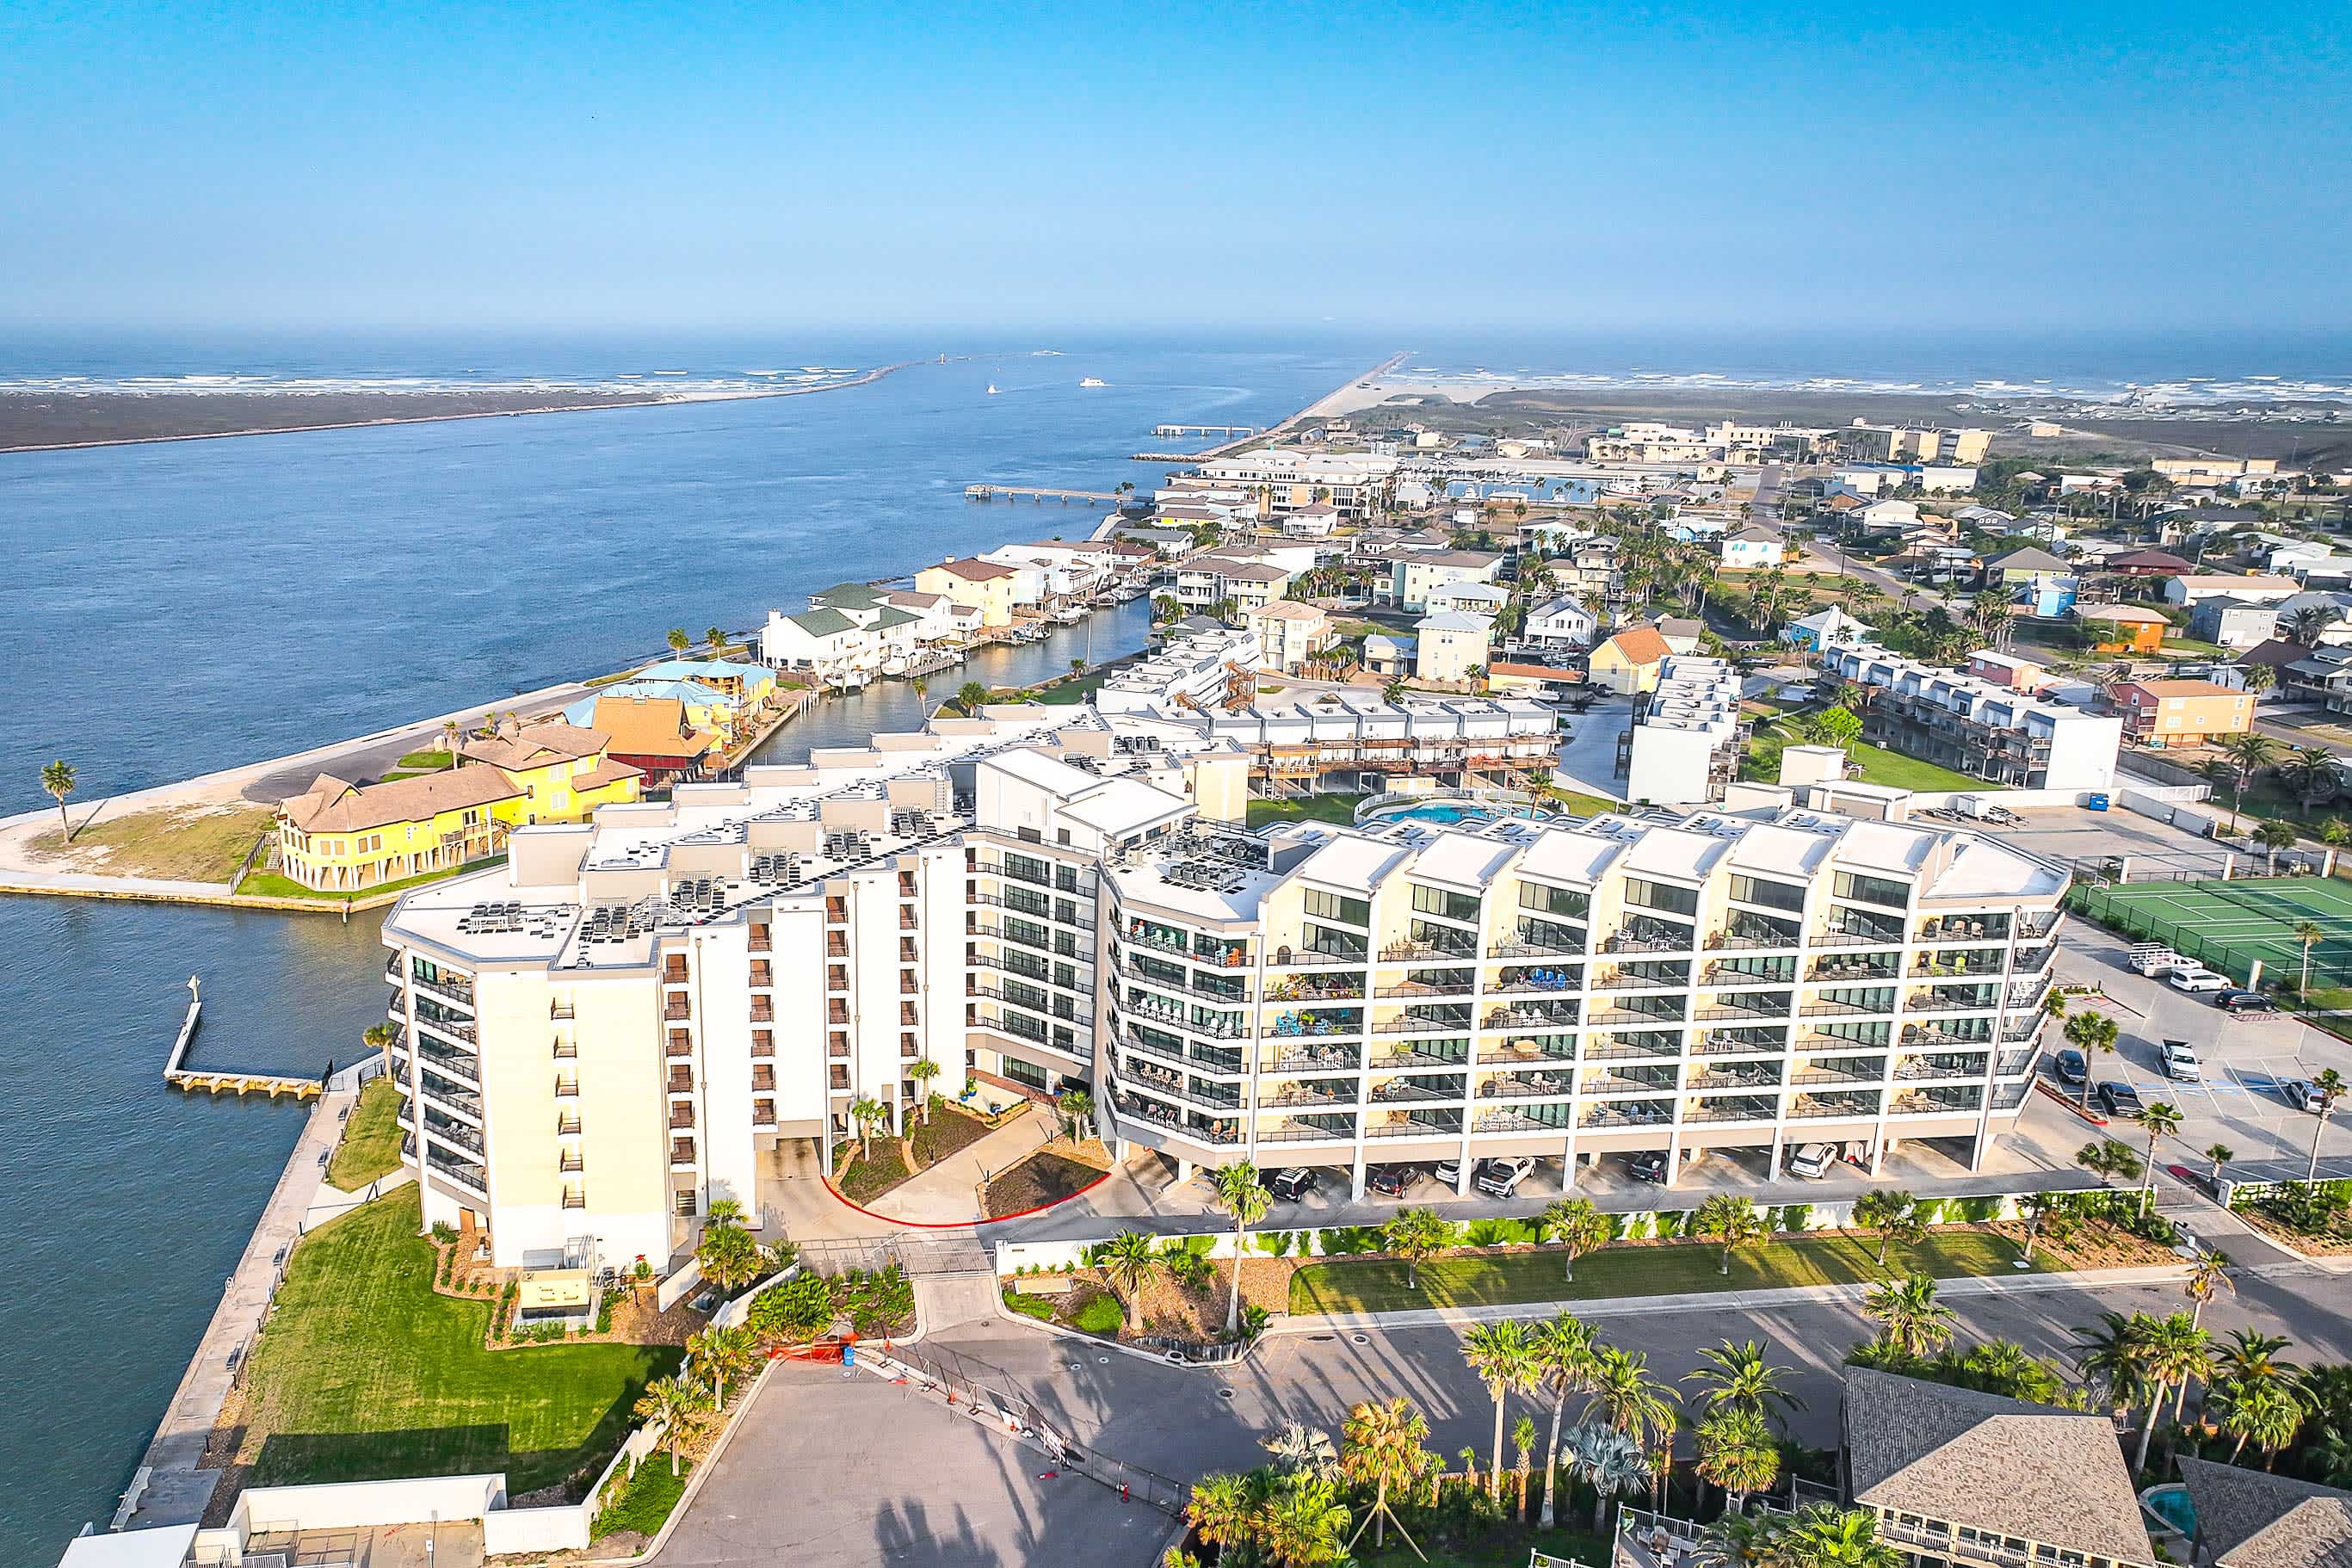 Drone photo of Port Aransas, TX with buildings and condos on the right and water on the left with blue skies above